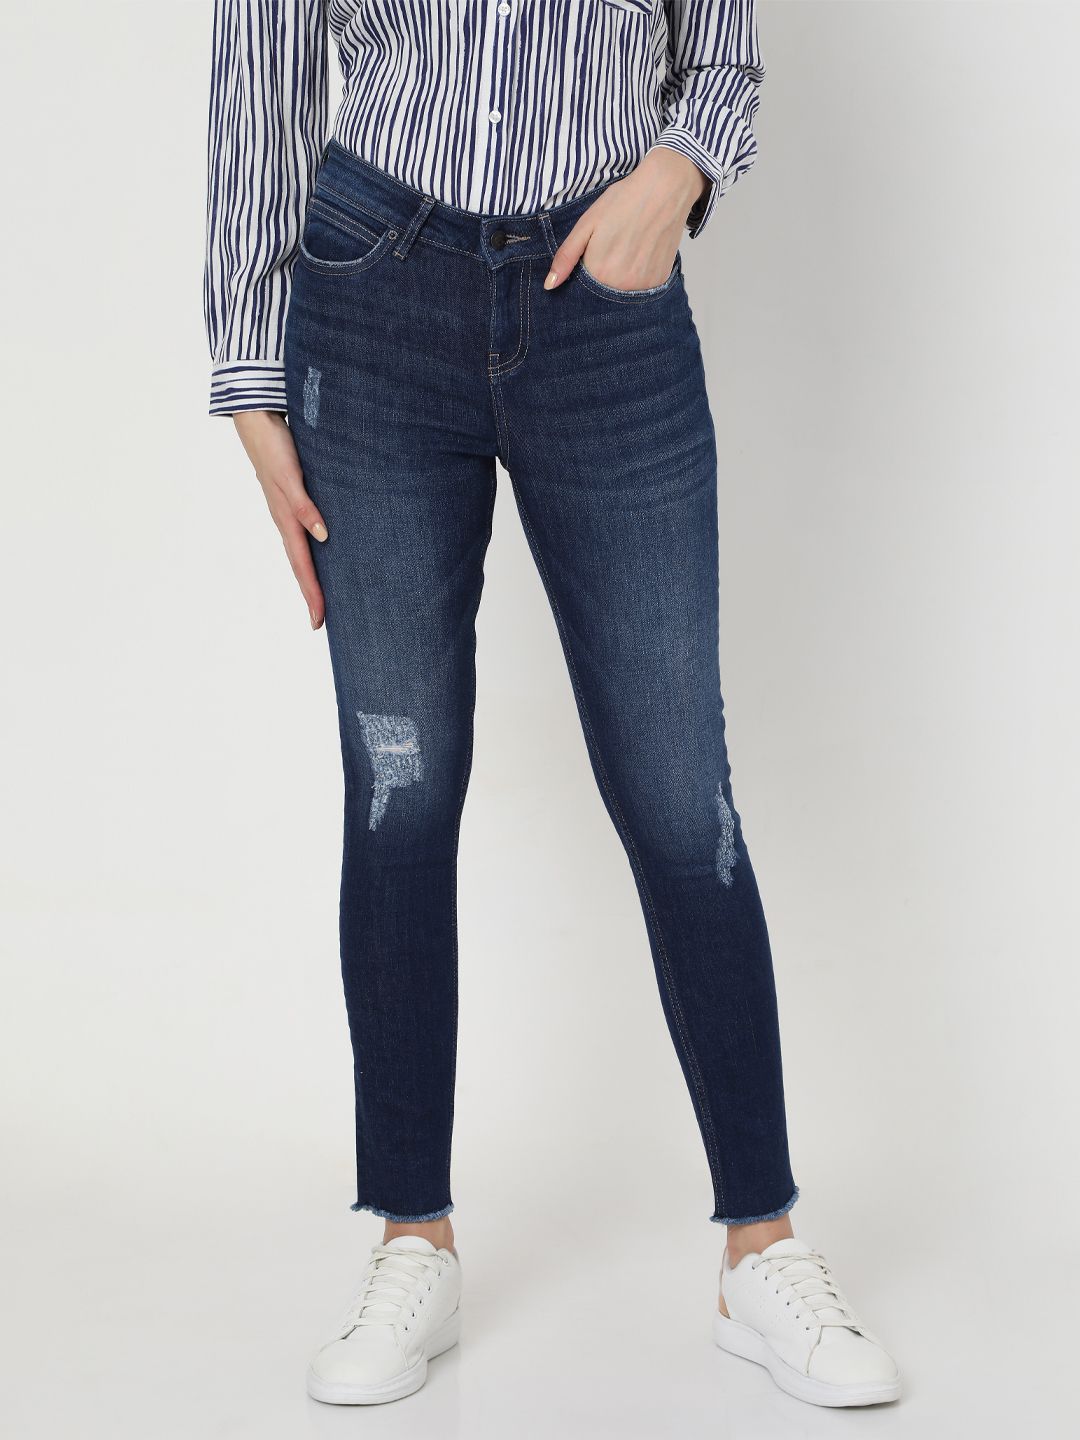 Vero Moda Women Blue Skinny Fit Mildly Distressed Mid Rise Stretchable Light Fade Jeans Price in India